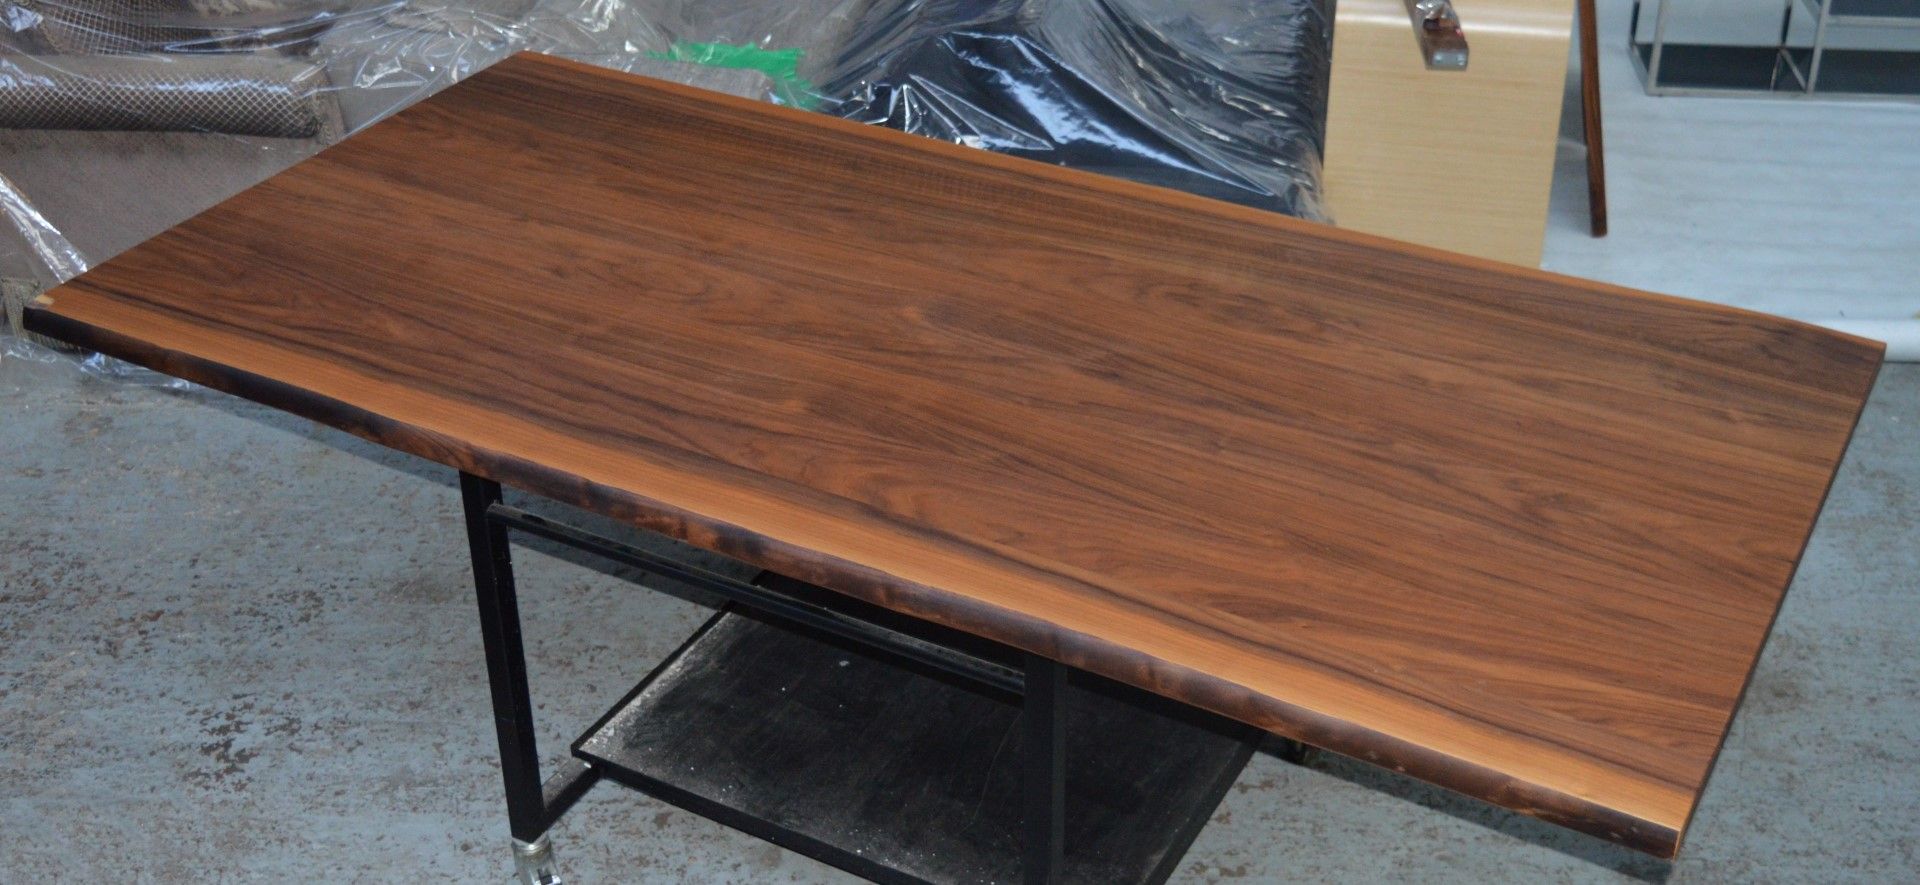 1 x Cattelan Ikon Drive Table Top - Base Not Included - 240x120cm - Ref: 3511316 - CL087 - Location: